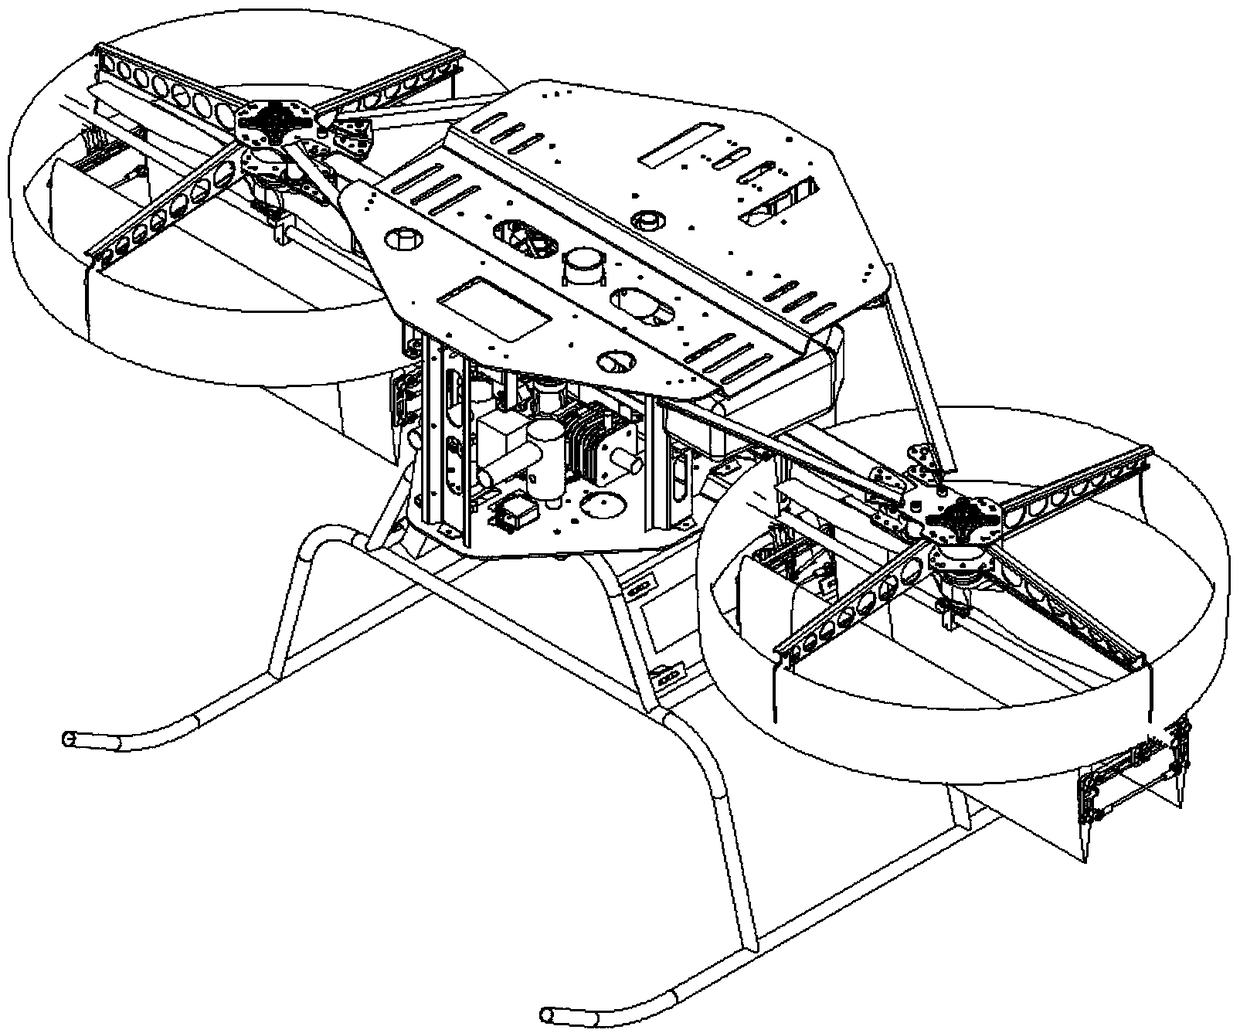 A tandem double-duct unmanned aerial vehicle capable of power generation and loading with two-stage transmission engines